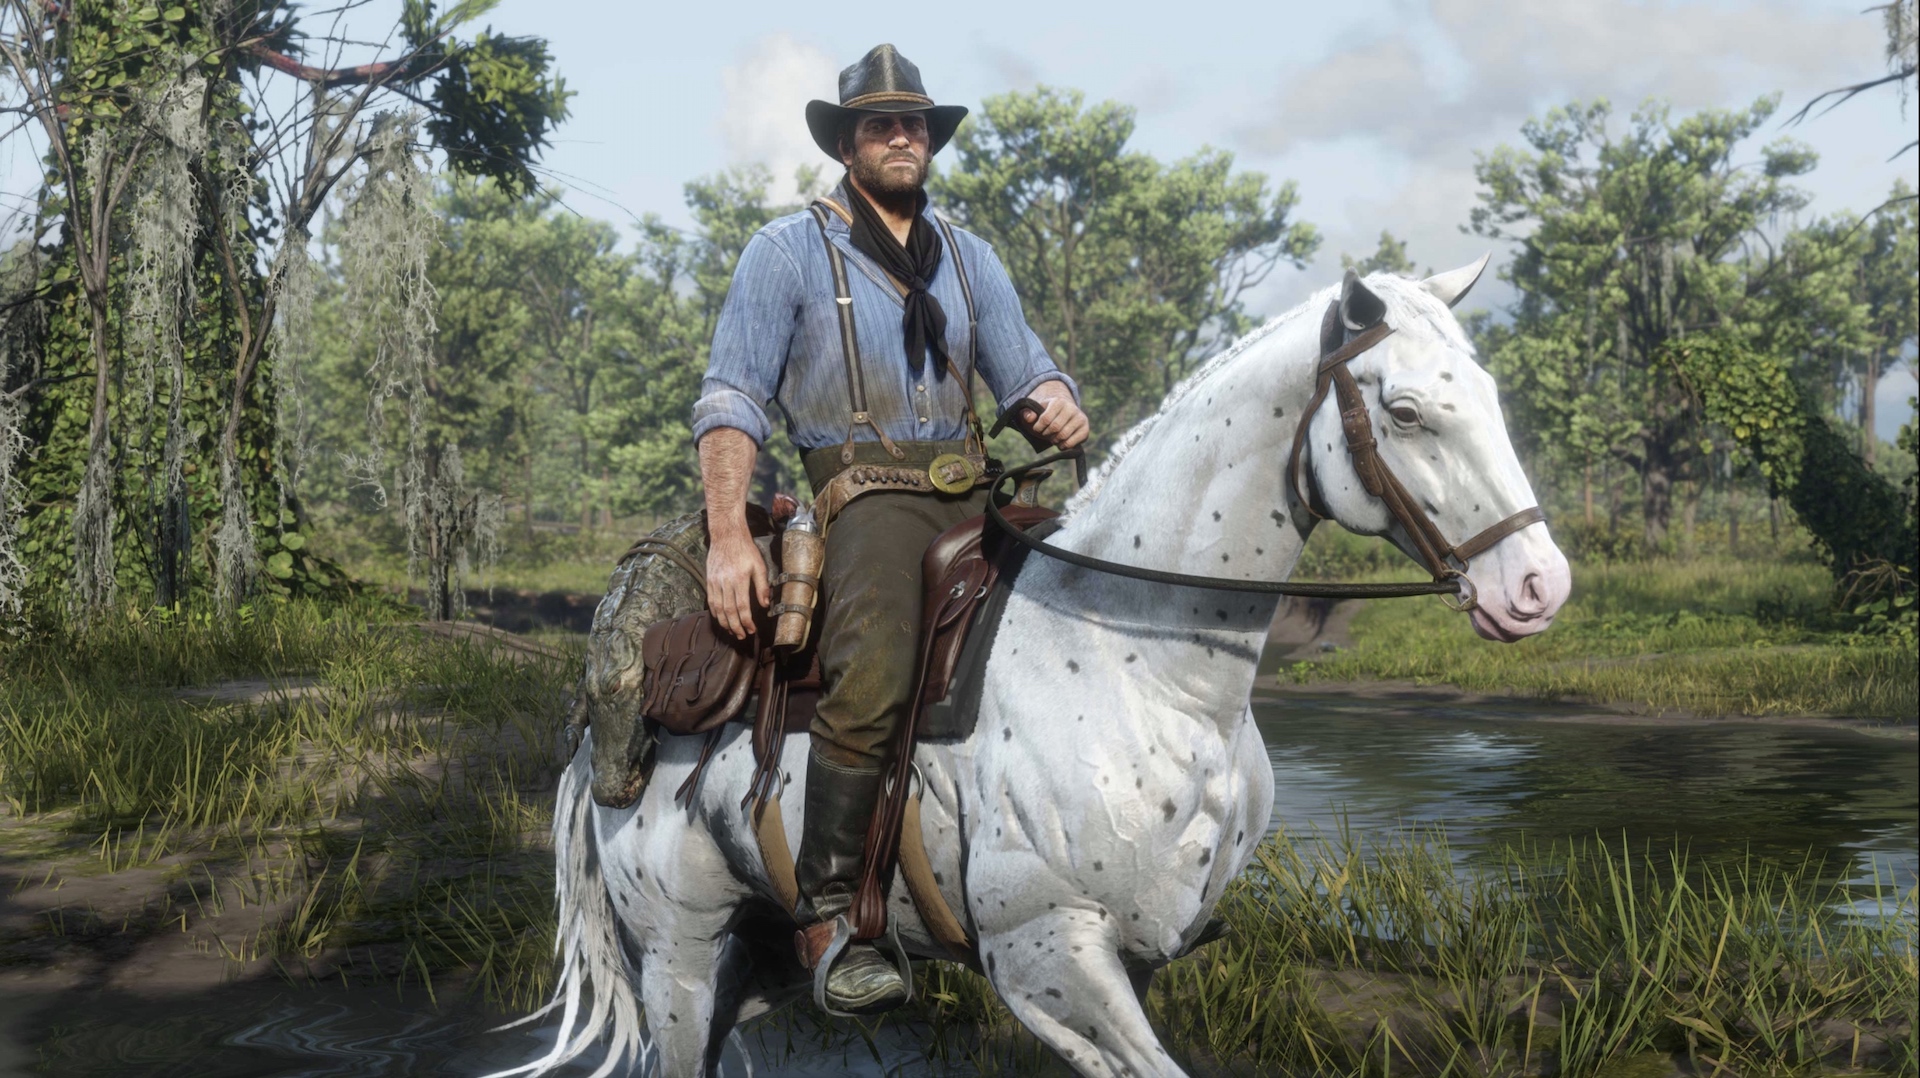 Red Dead Redemption 2 PC Digital Sales Boosted by Steam Launch – SuperData